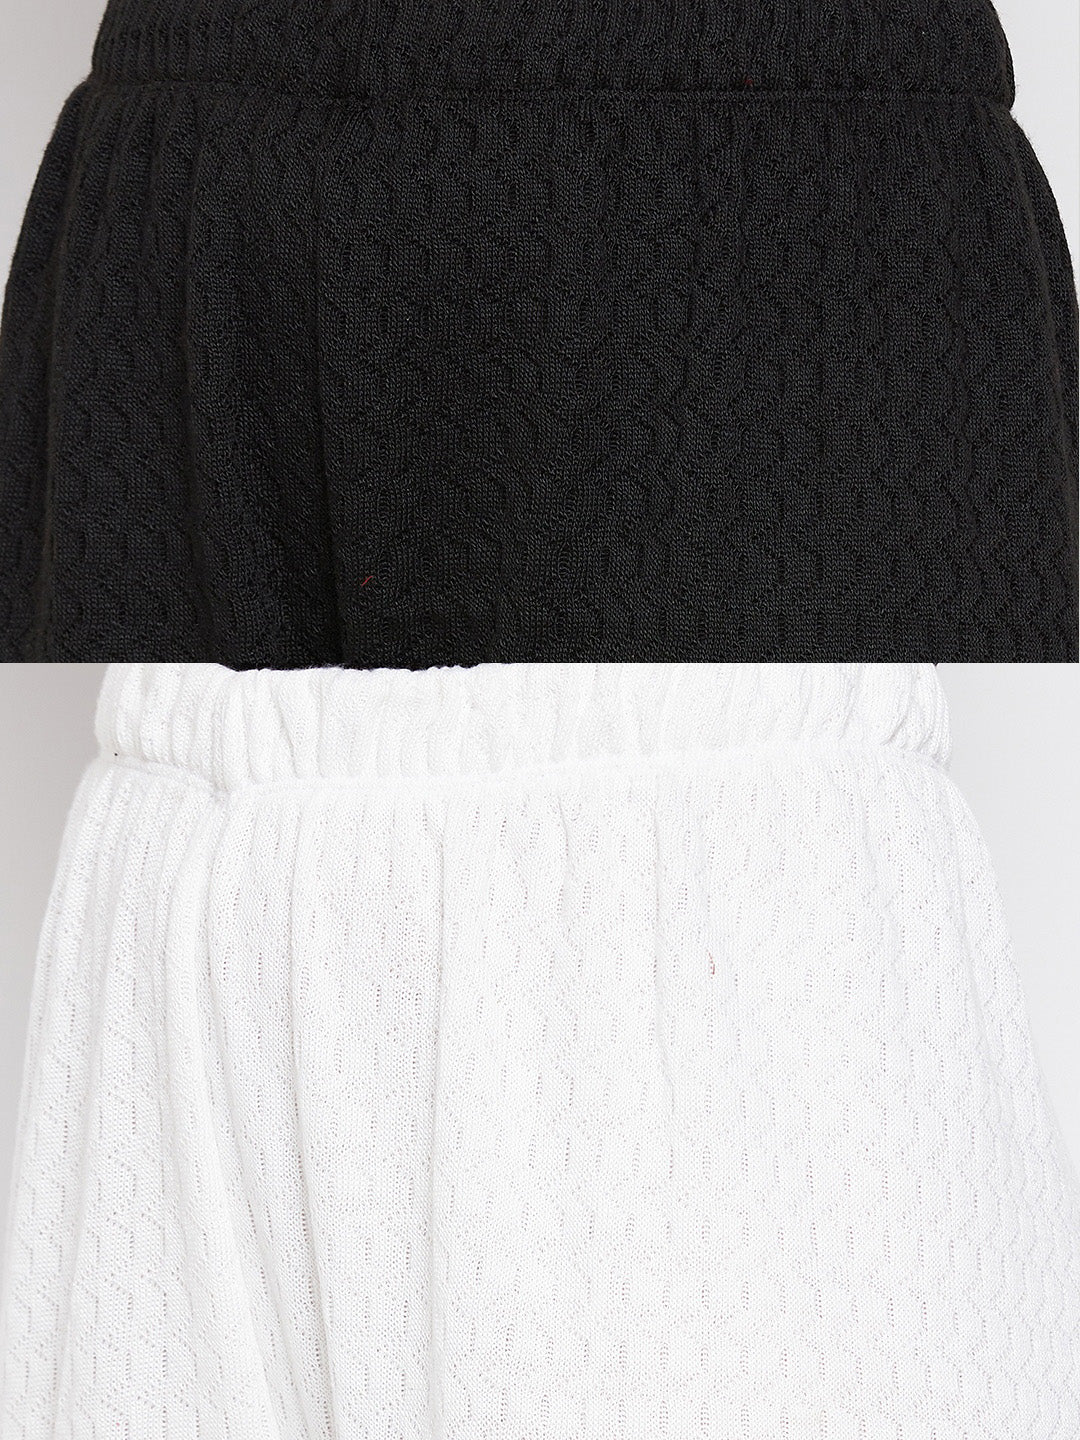 Clora Black & White Solid Woolen Palazzo (Pack of 2)